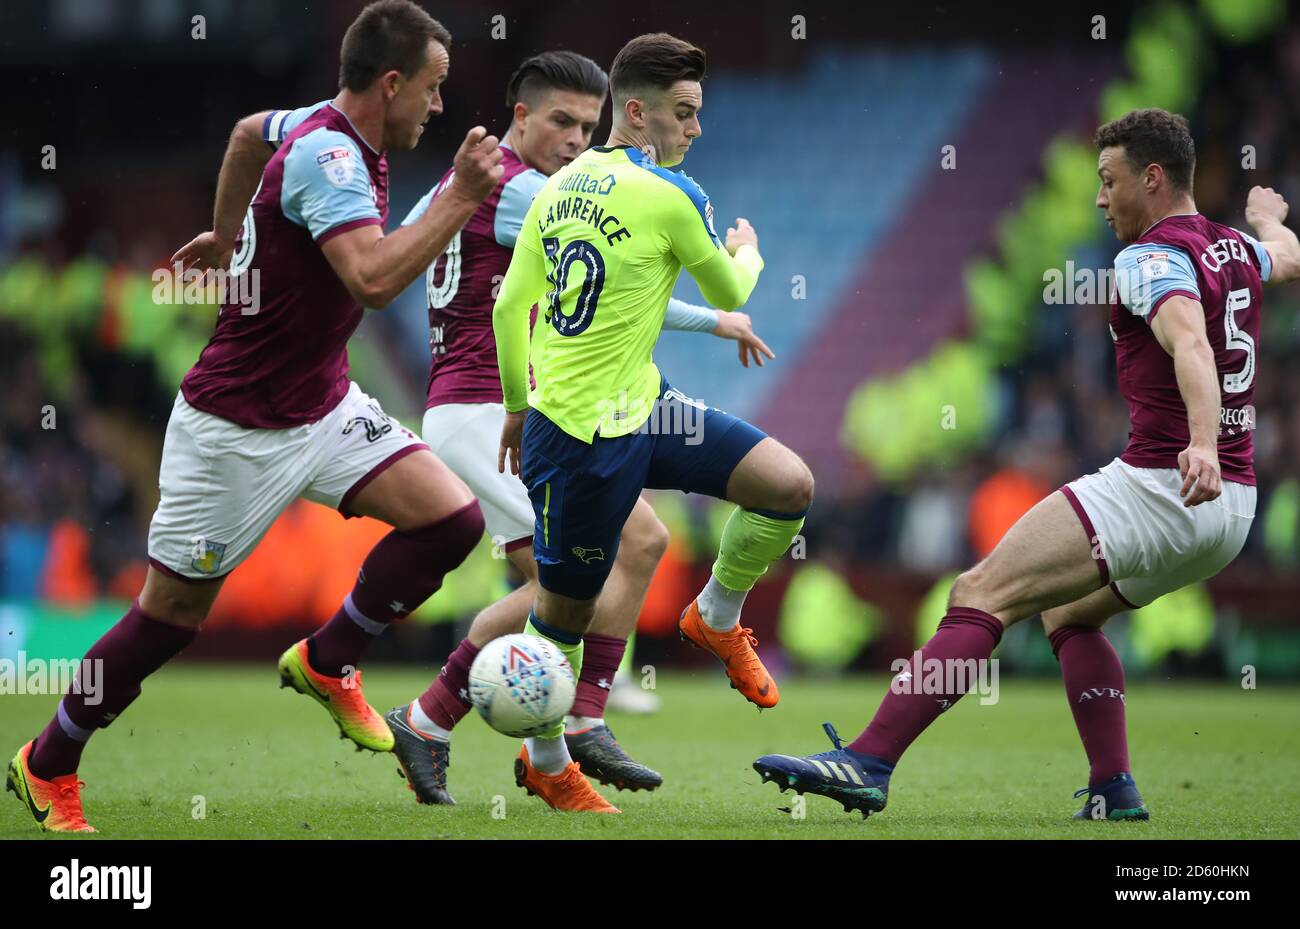 Derby County's Tom Lawrence holds off challenges from Aston Villa's John Terry and Aston Villa's Jack Grealish but is tackled by Aston Villa's James Chester  Stock Photo